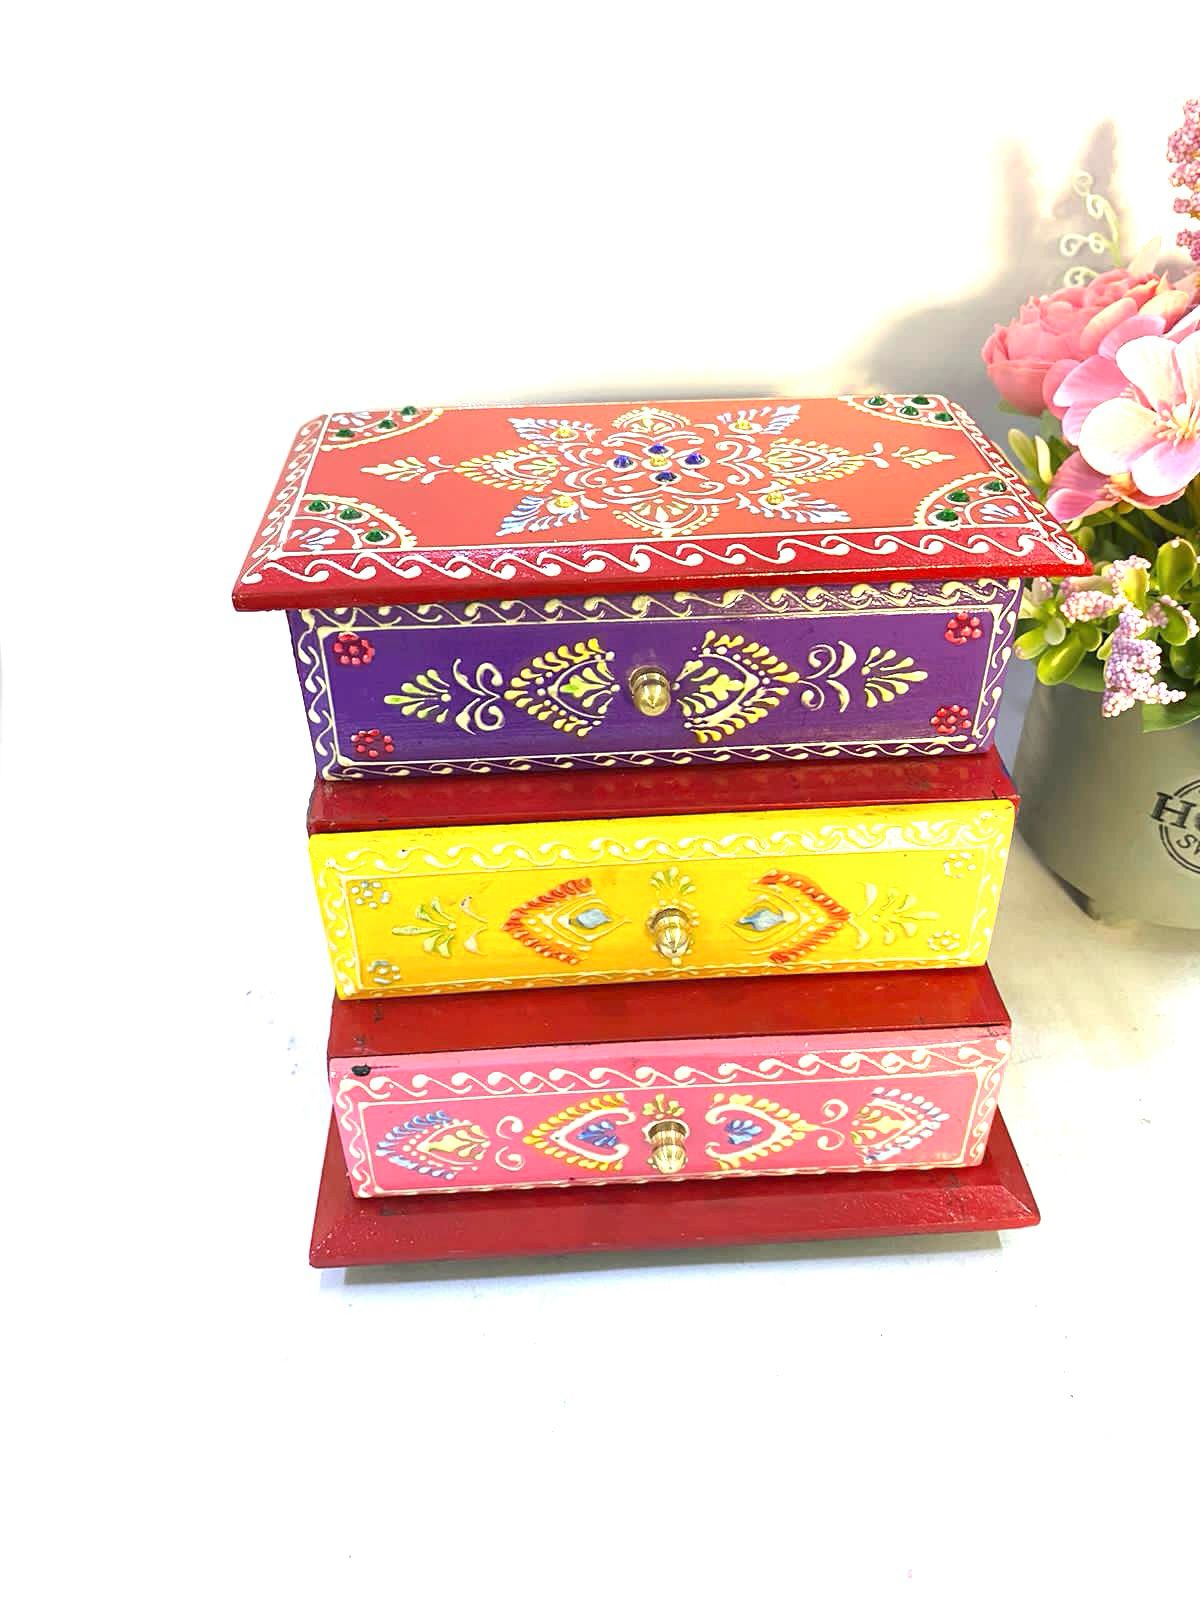 Jewelry Wooden Box Traditional Hand Painted Exclusive Creations Indian Art Tamrapatra